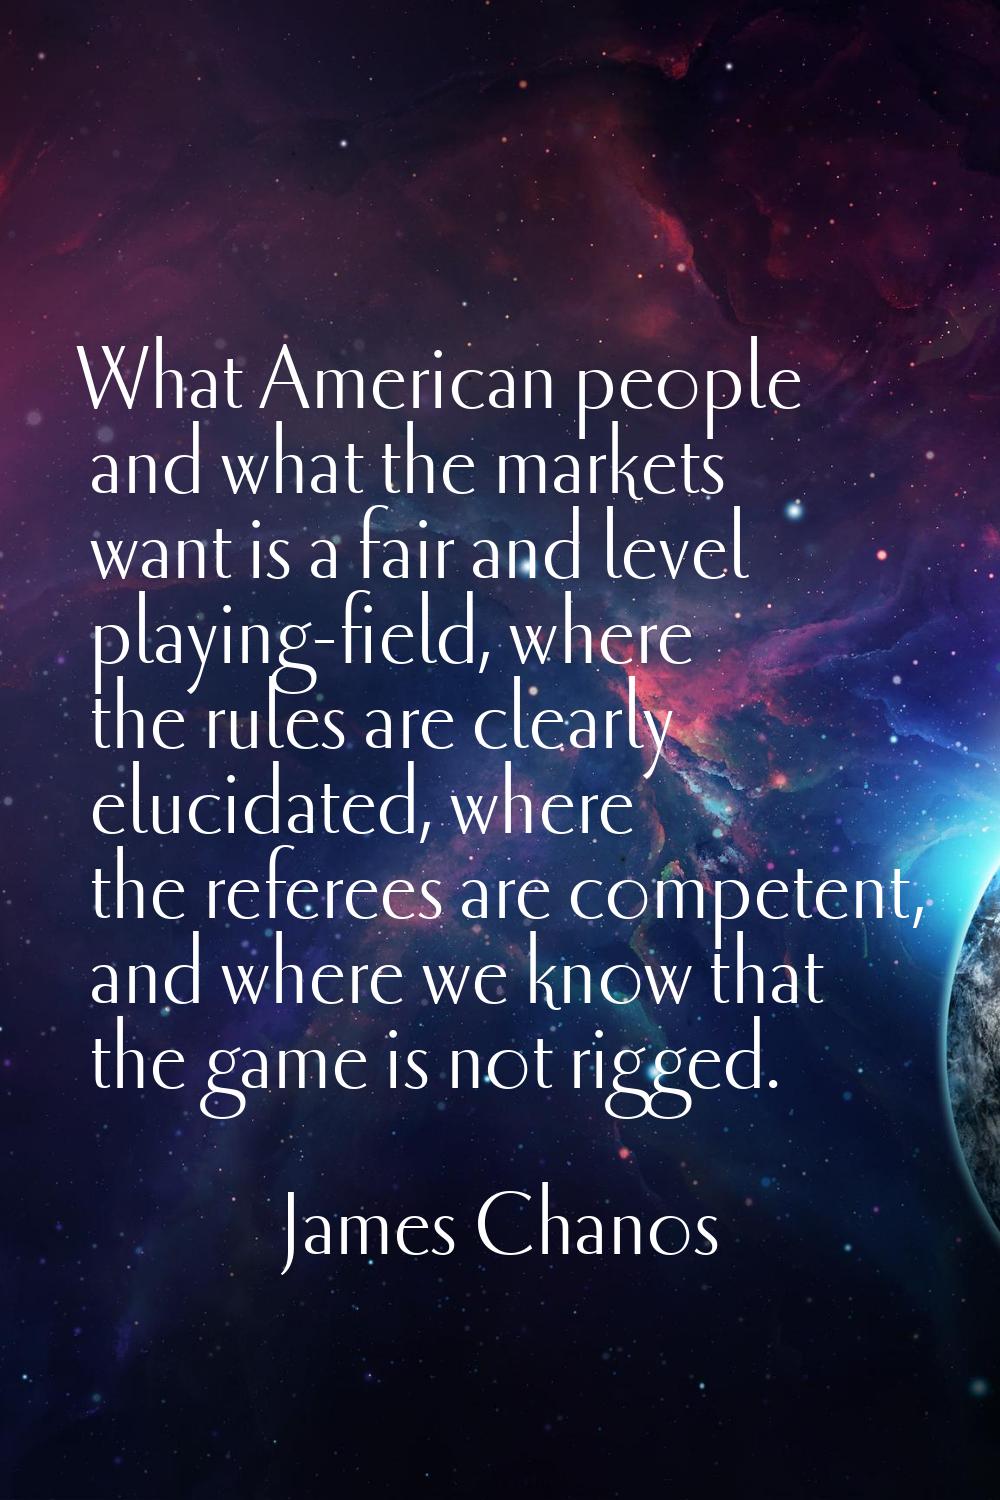 What American people and what the markets want is a fair and level playing-field, where the rules a